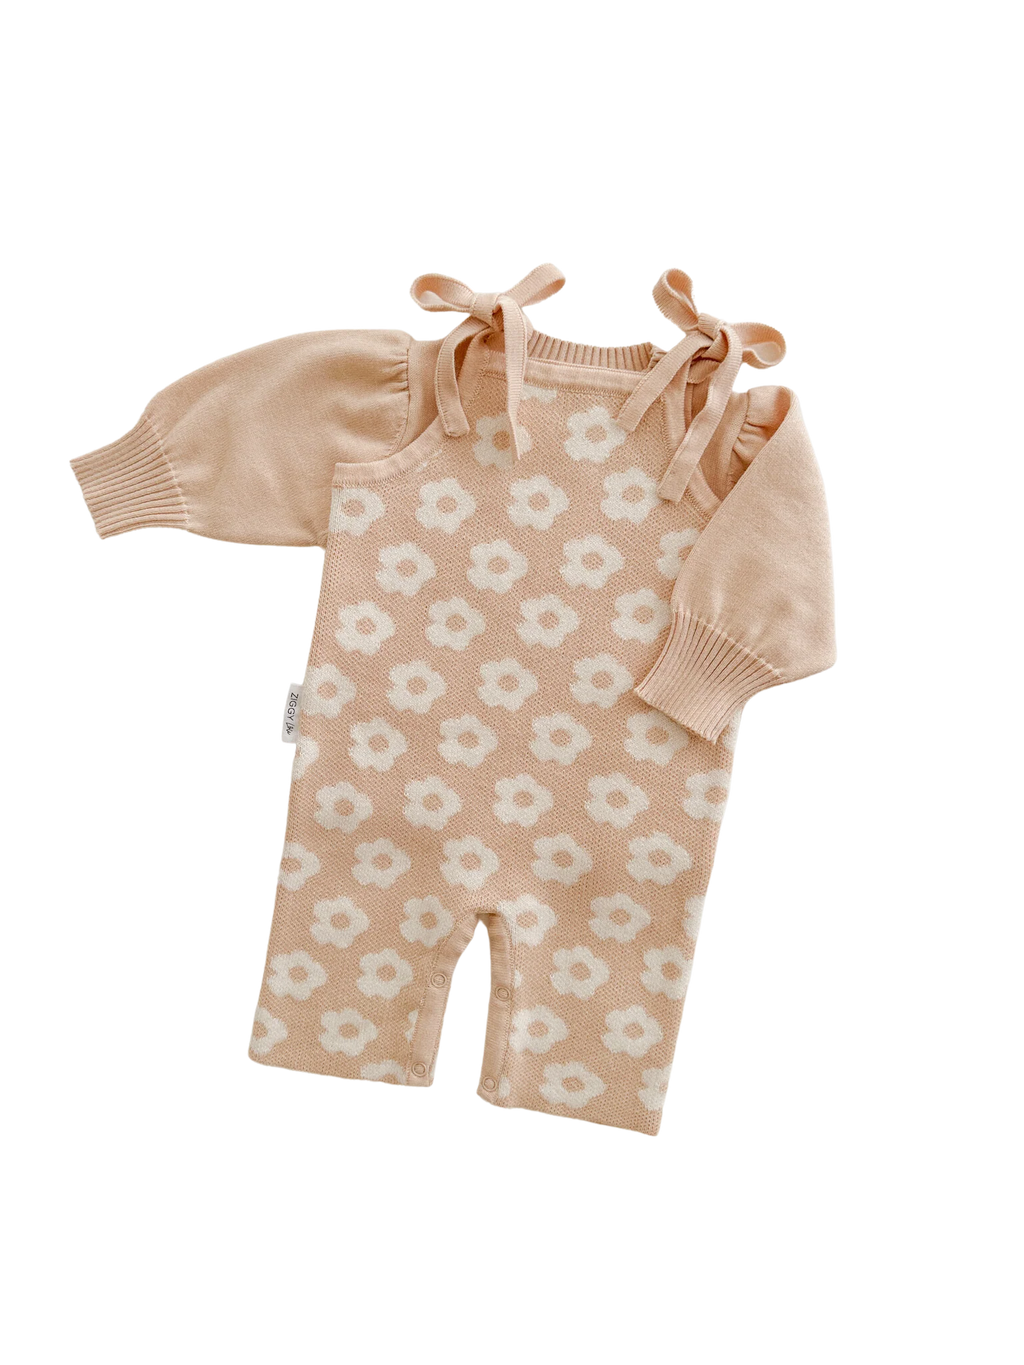 Ziggy Lou - Blouse - Peach (ONLY SIZE 000 LEFT)